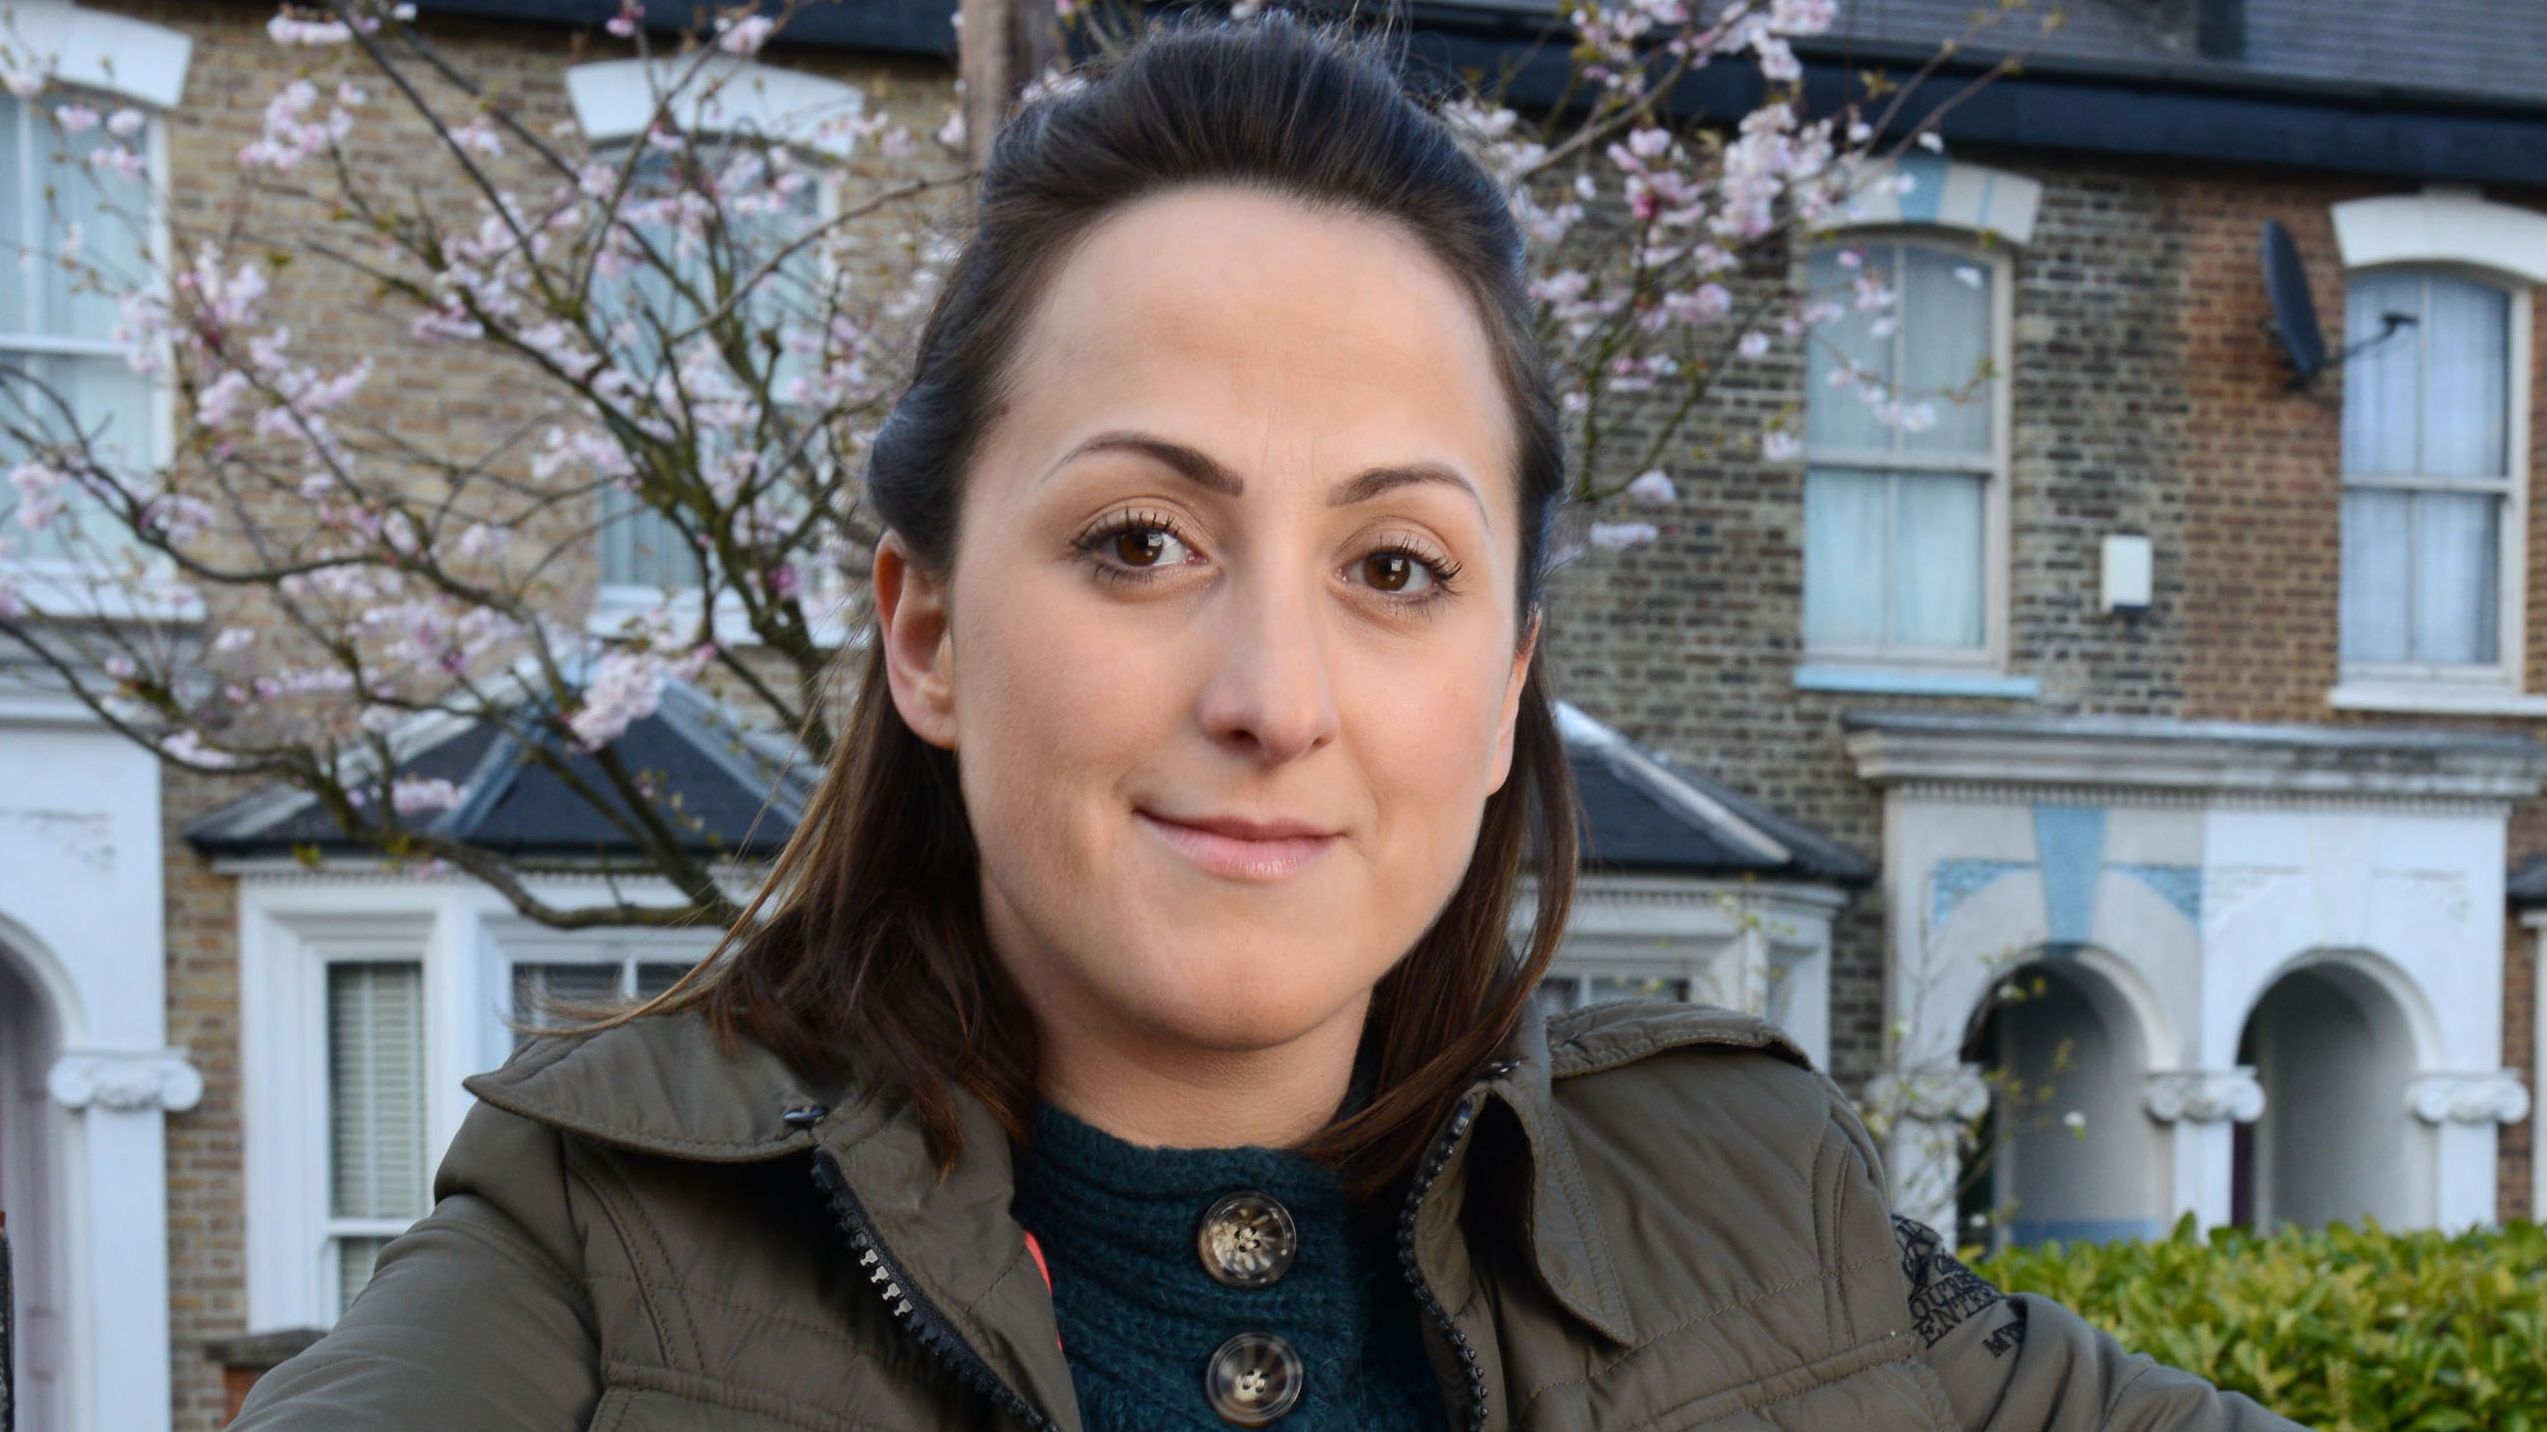 Eastenders Natalie Cassidy Shows Off Impressive Weight Loss Following London Marathon